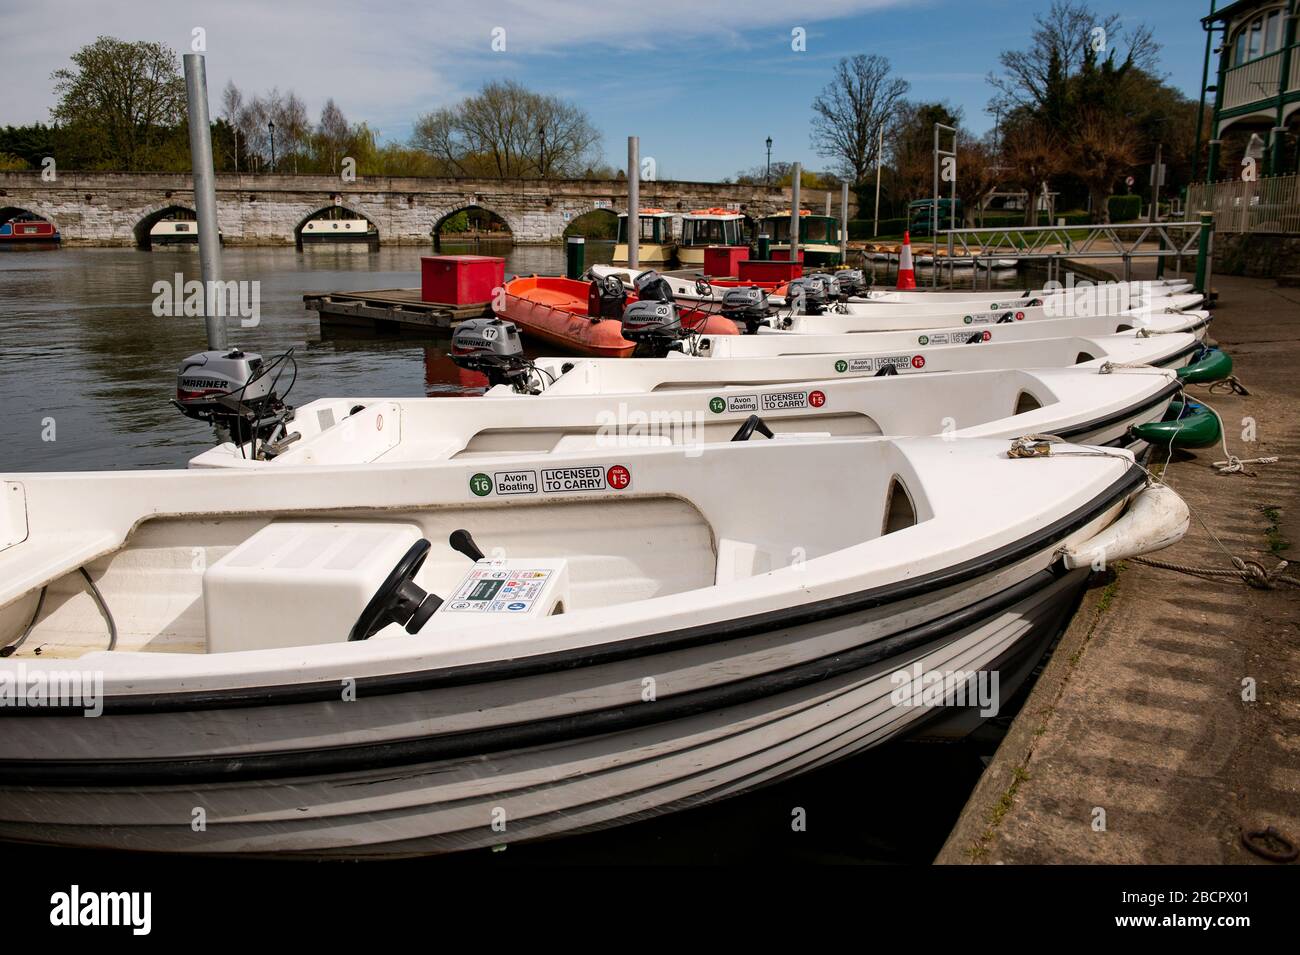 Boats lie unused on what might have been a busy day of tourism in an otherwise near-deserted Stratford-upon-Avon in Warwickshire, as the UK continues in lockdown to help curb the spread of the coronavirus. Stock Photo